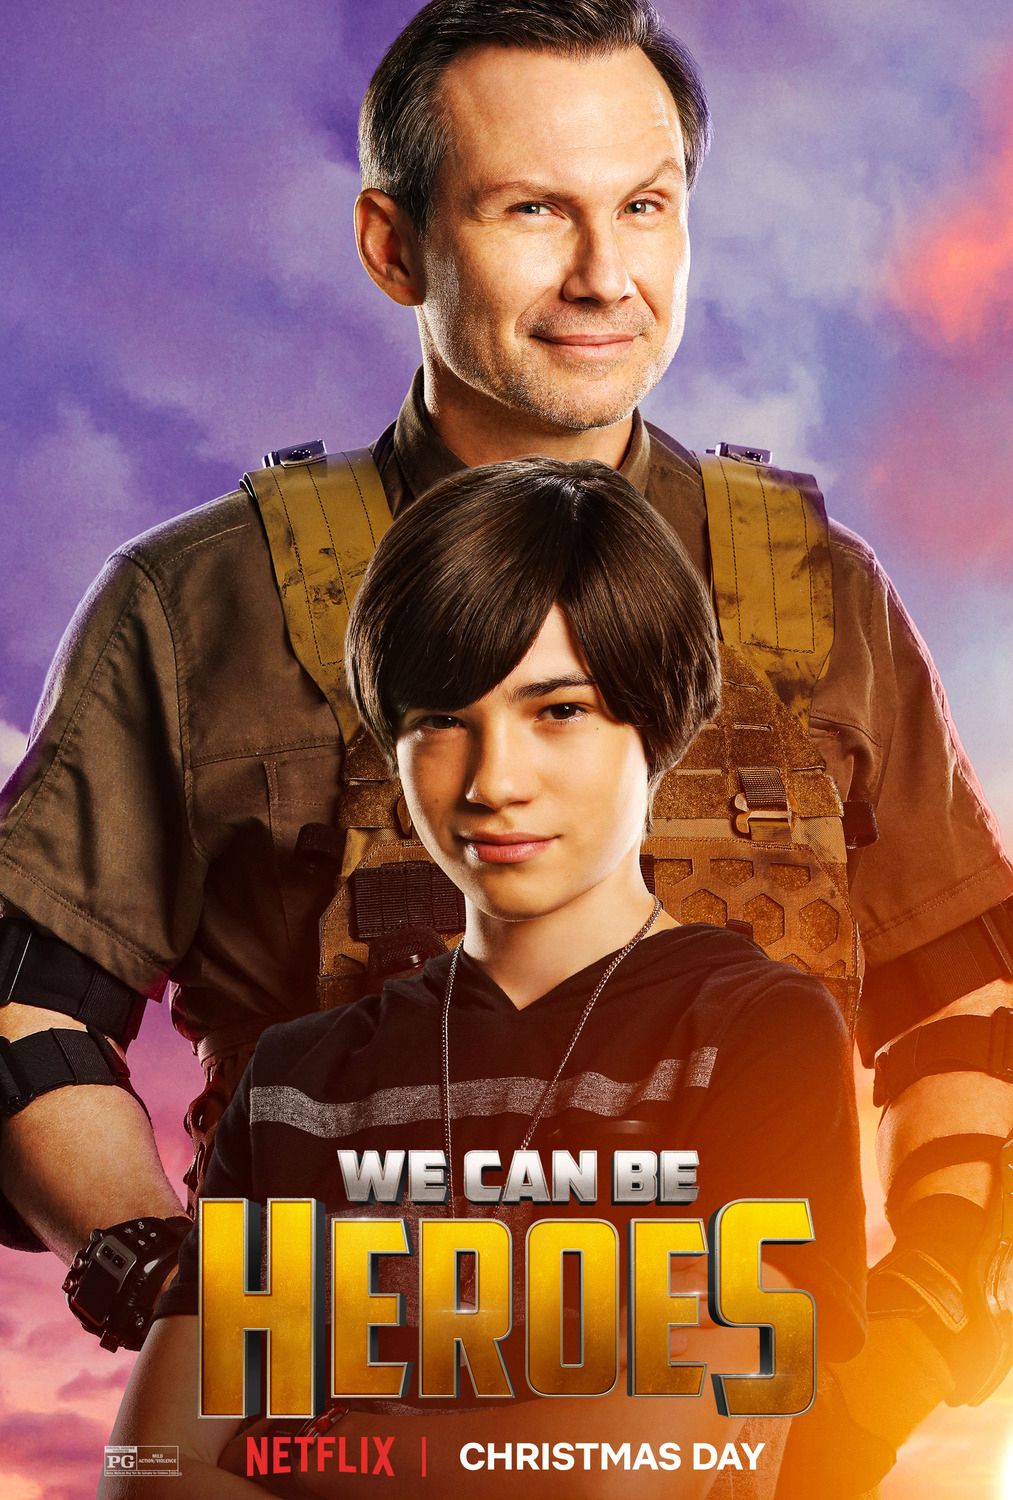 We Can Be Heroes Character Poster #3